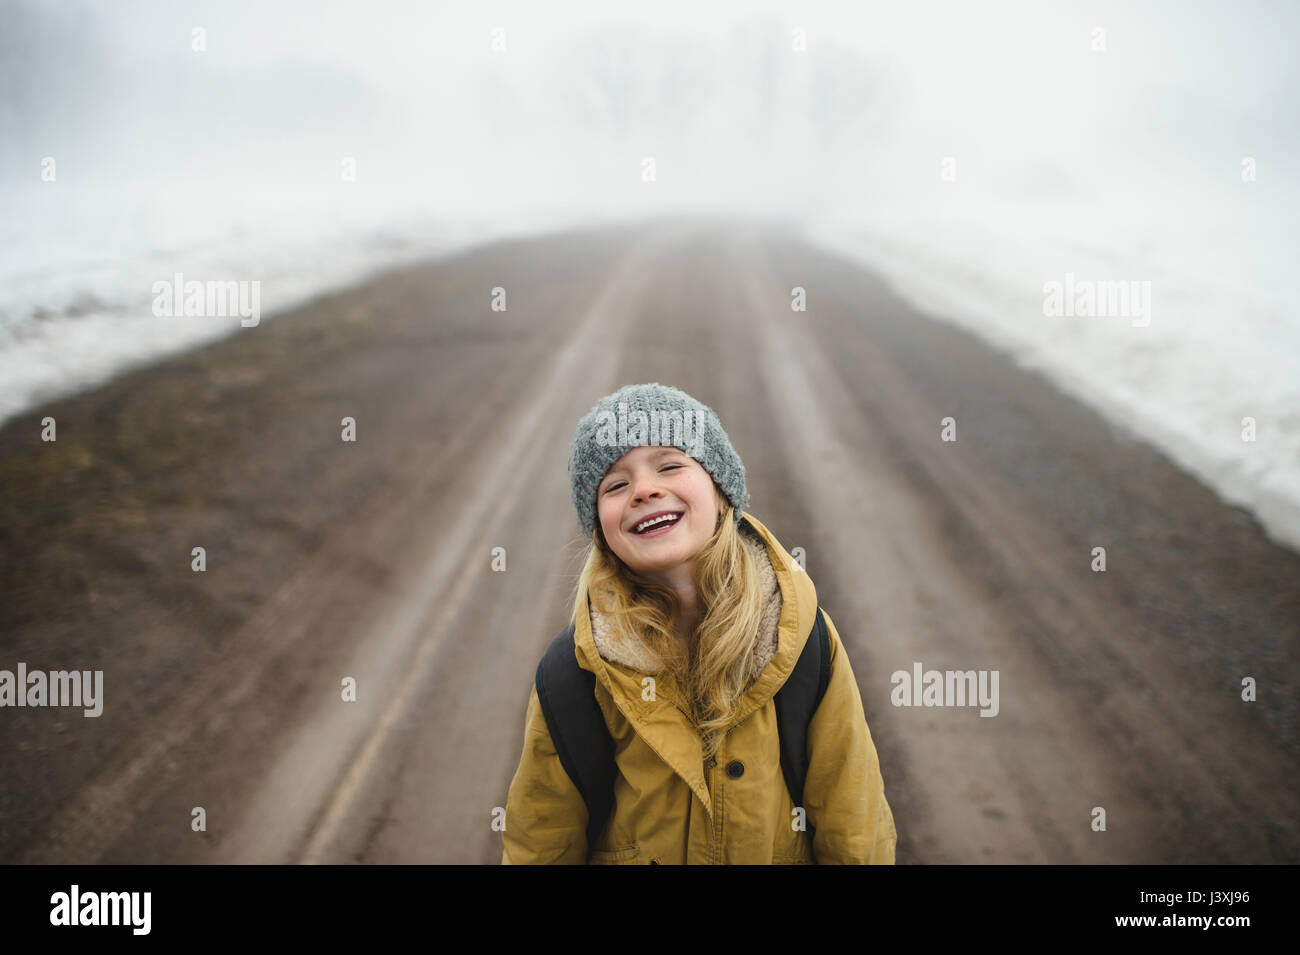 Portrait of girl in knit hat standing in middle of foggy dirt road laughing Stock Photo